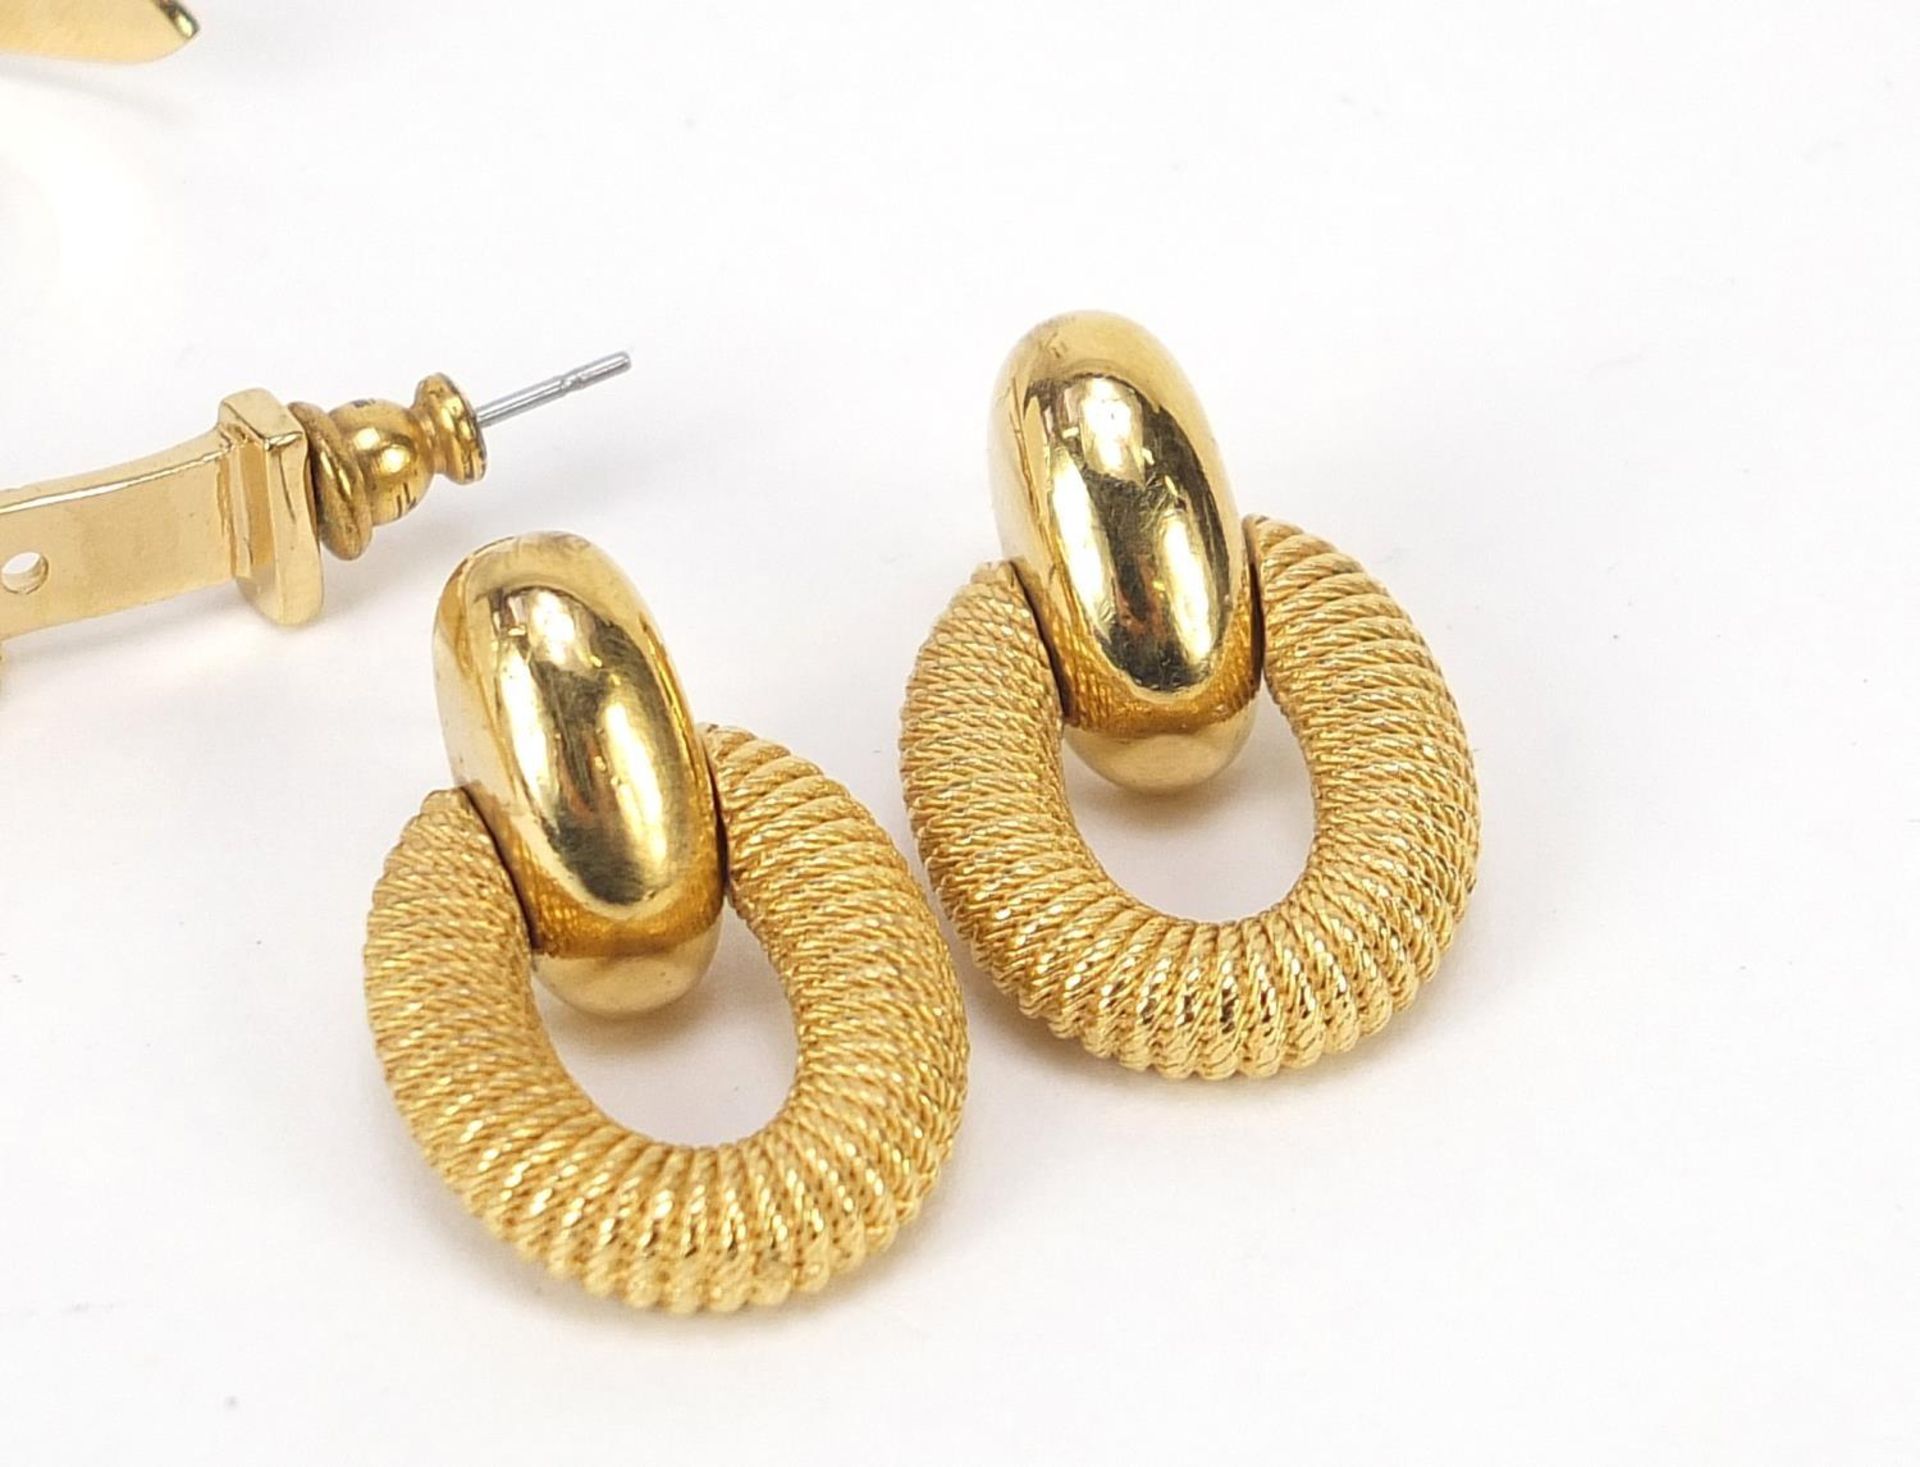 Two pairs of designer earrings by Burberrys and Karen Millen, 3.5cm and 2.5cm high : - Image 3 of 6